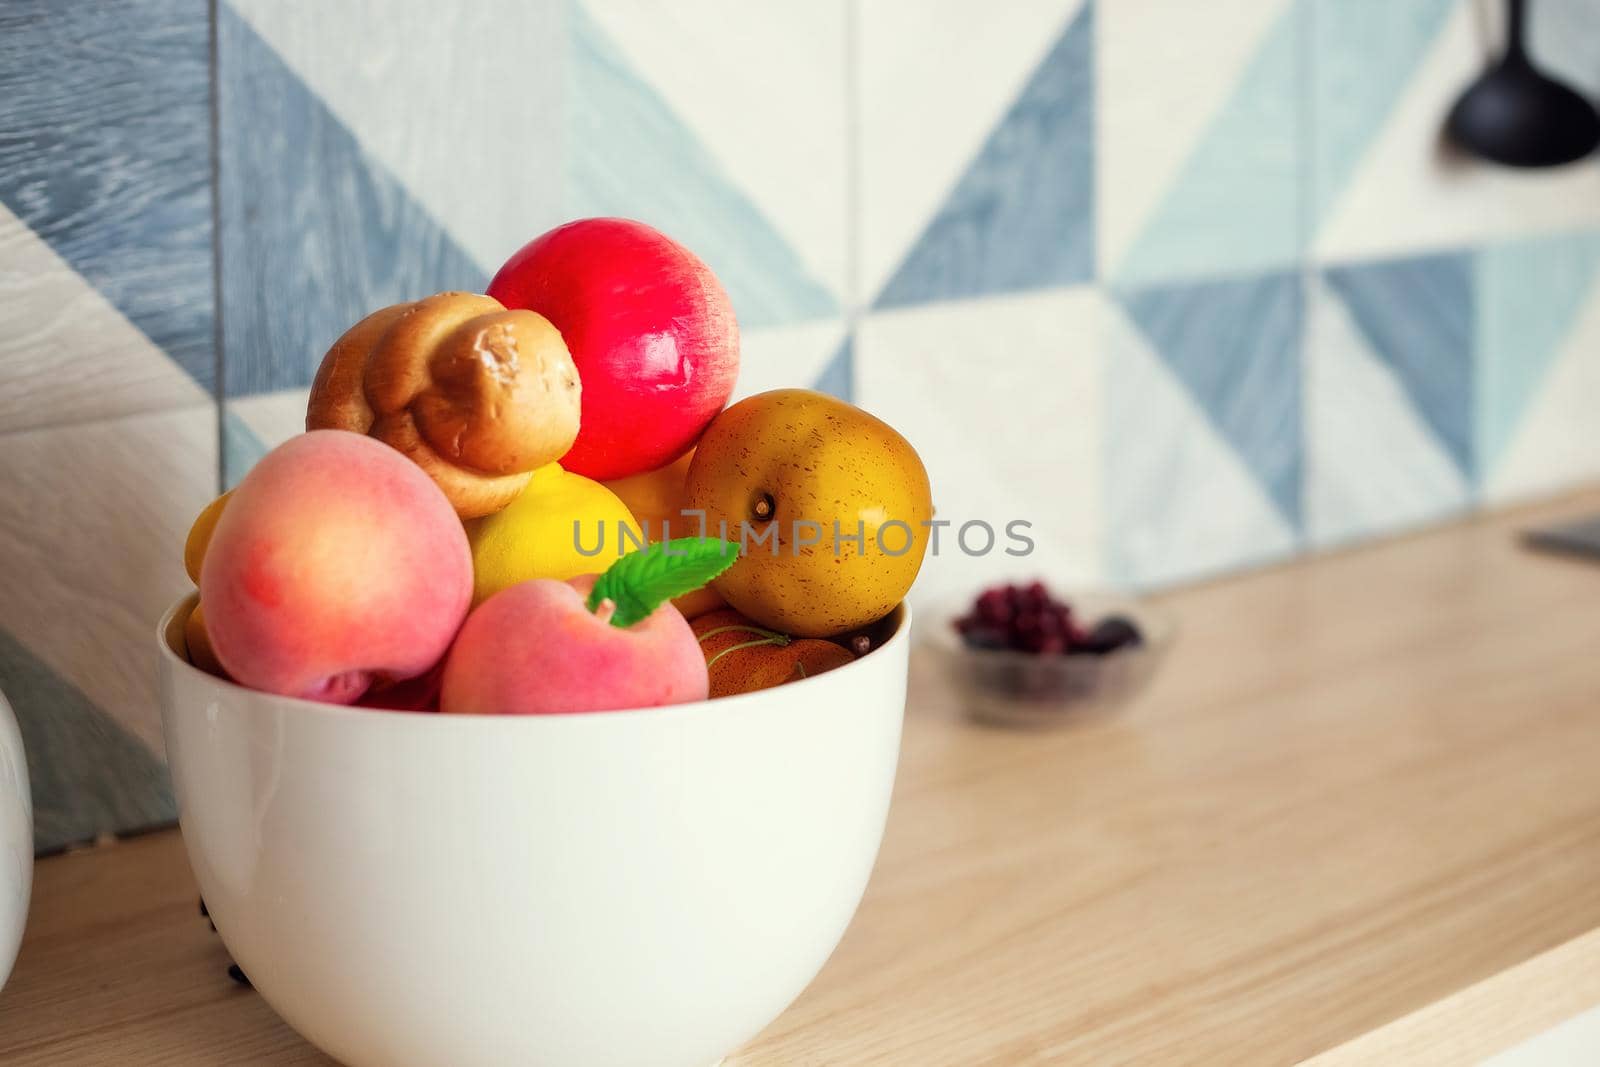 A large bowl of fruits and vegetables stands on the kitchen table by galinasharapova